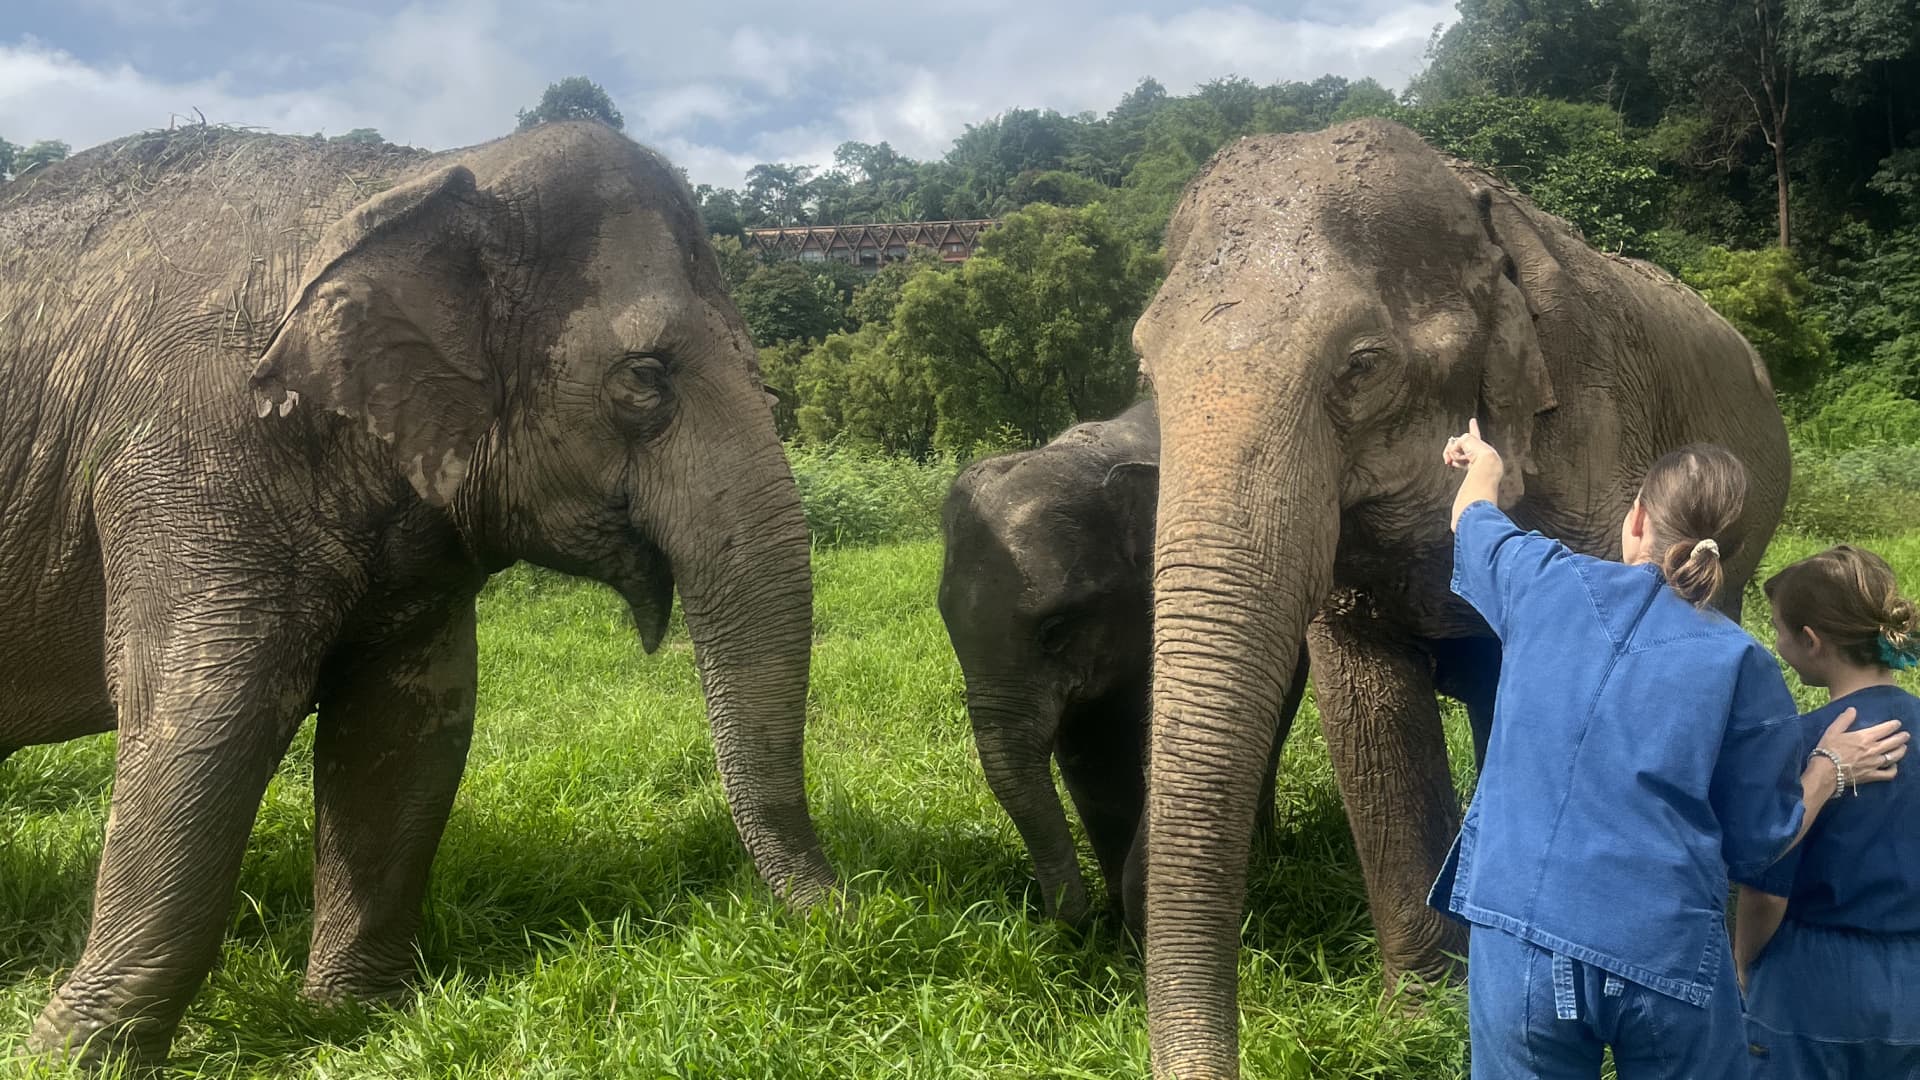 Anantara's Golden Triangle Elephant Resort & Camp currently has 20 elephants, including a mother and baby pair. The hotel said they do not buy the elephants, and riding them is forbidden.